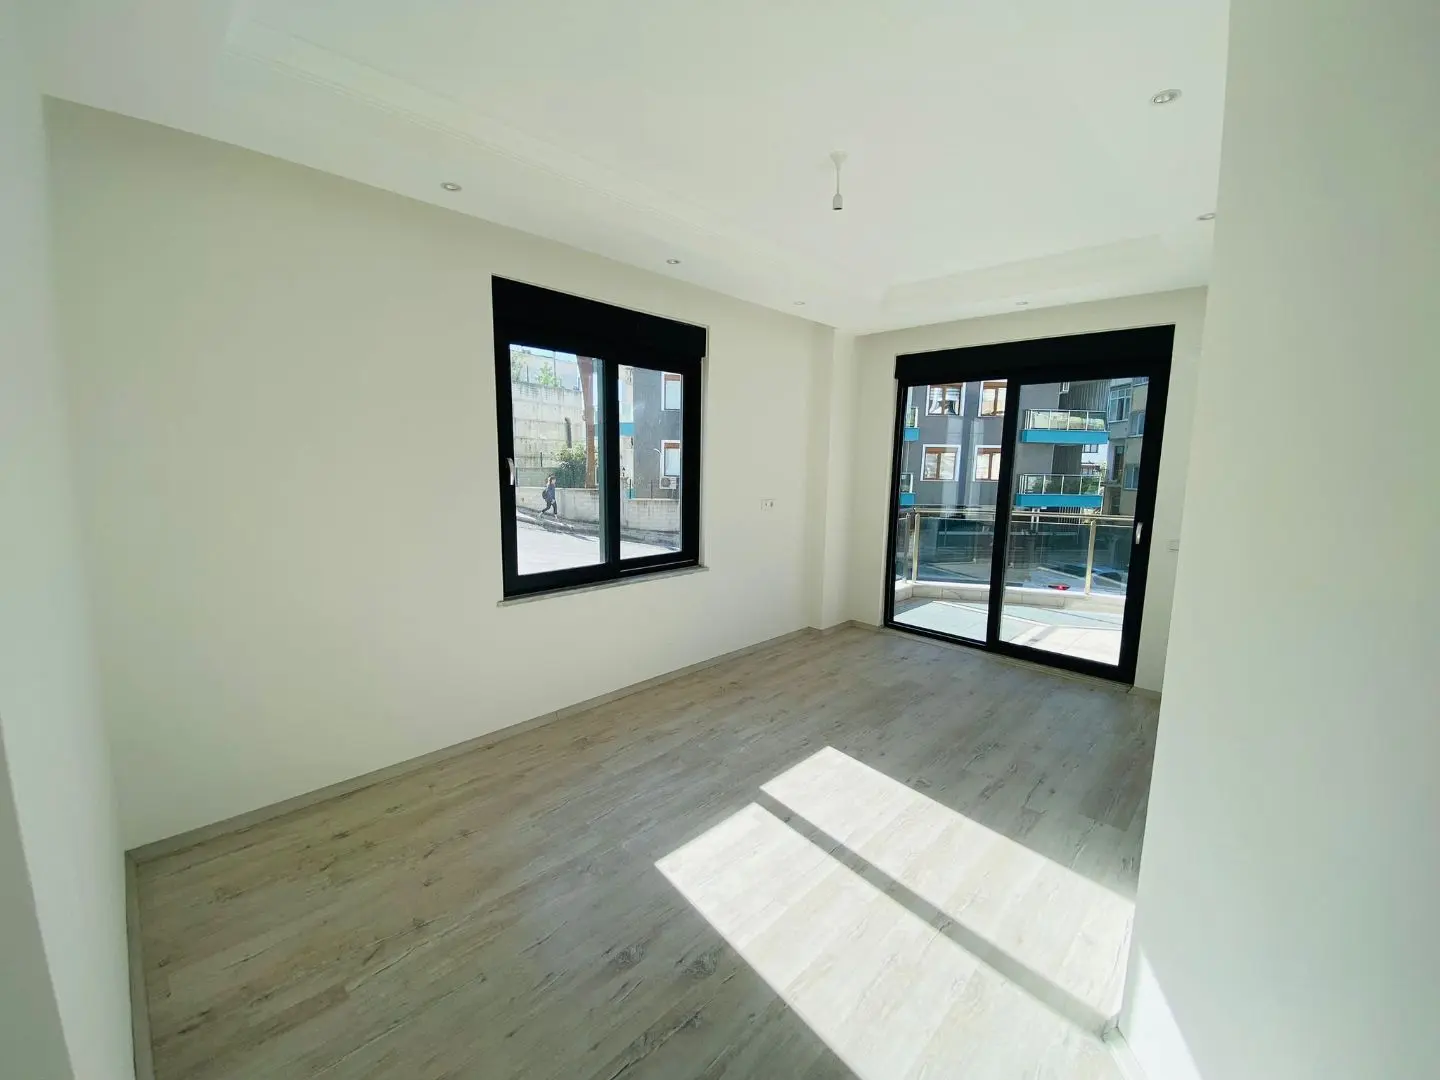 NEW SPACIOUS 2+1 FLAT IN THE CENTER OF ALANYA